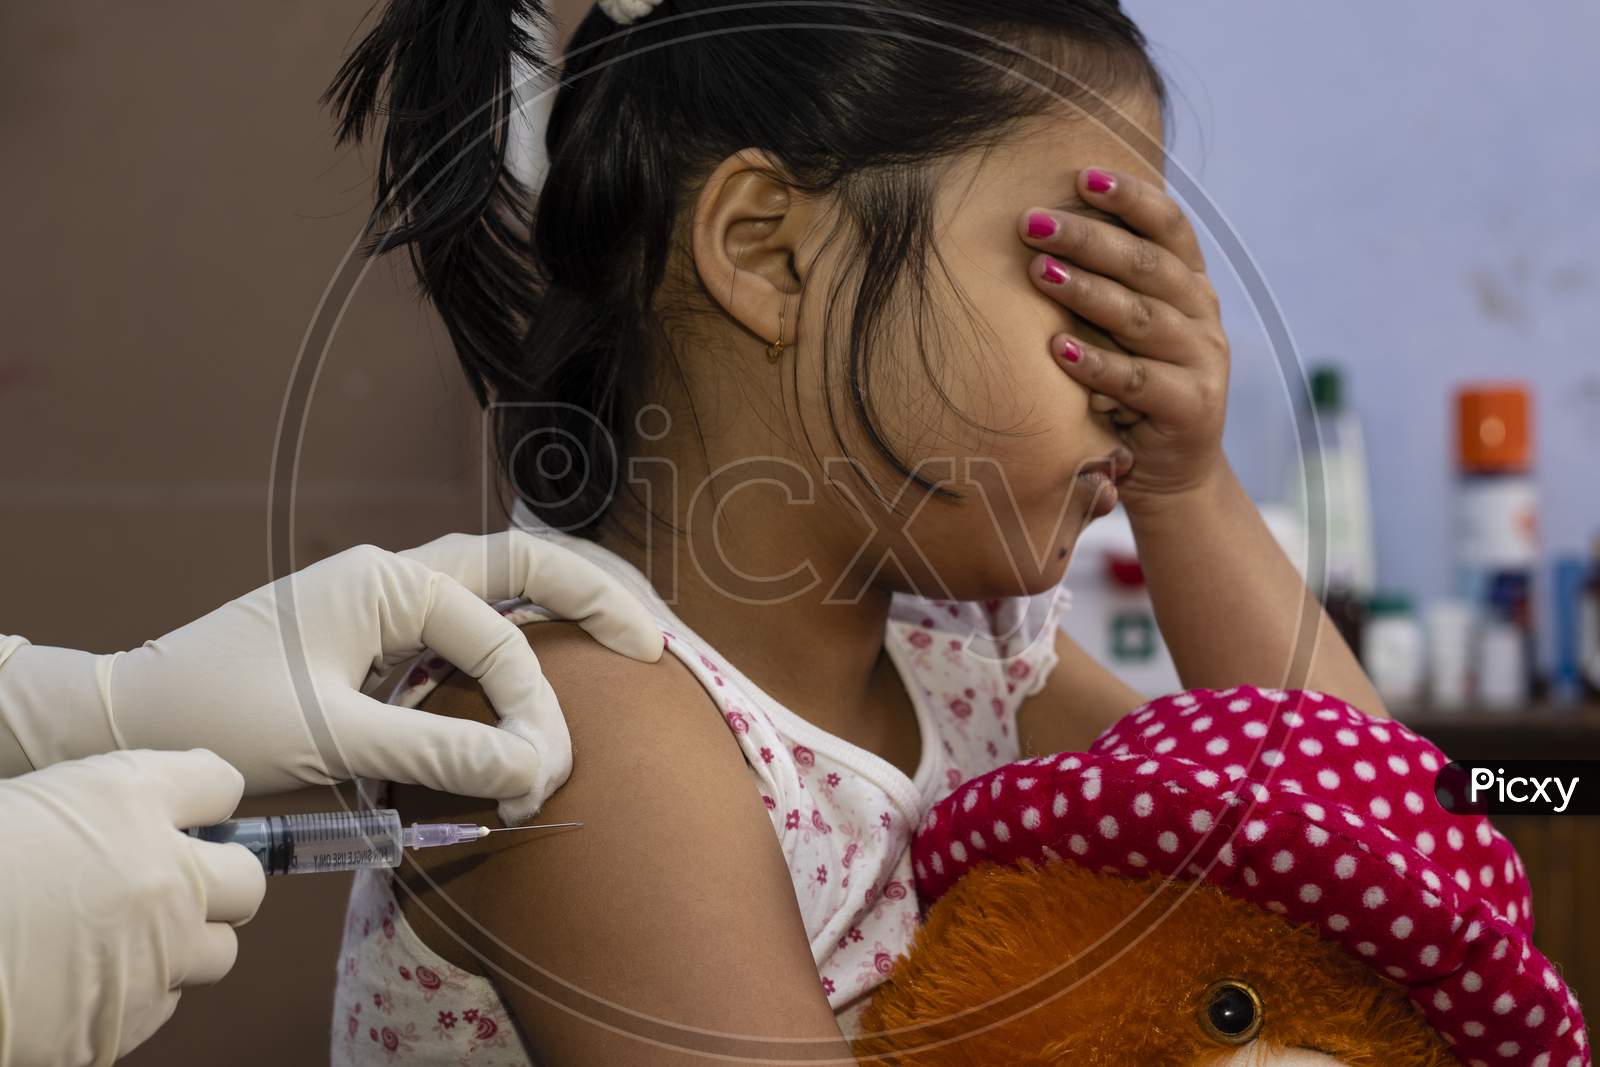 An Indian Girl Child With Doll Covers Her Eyes In Fear During Vaccination